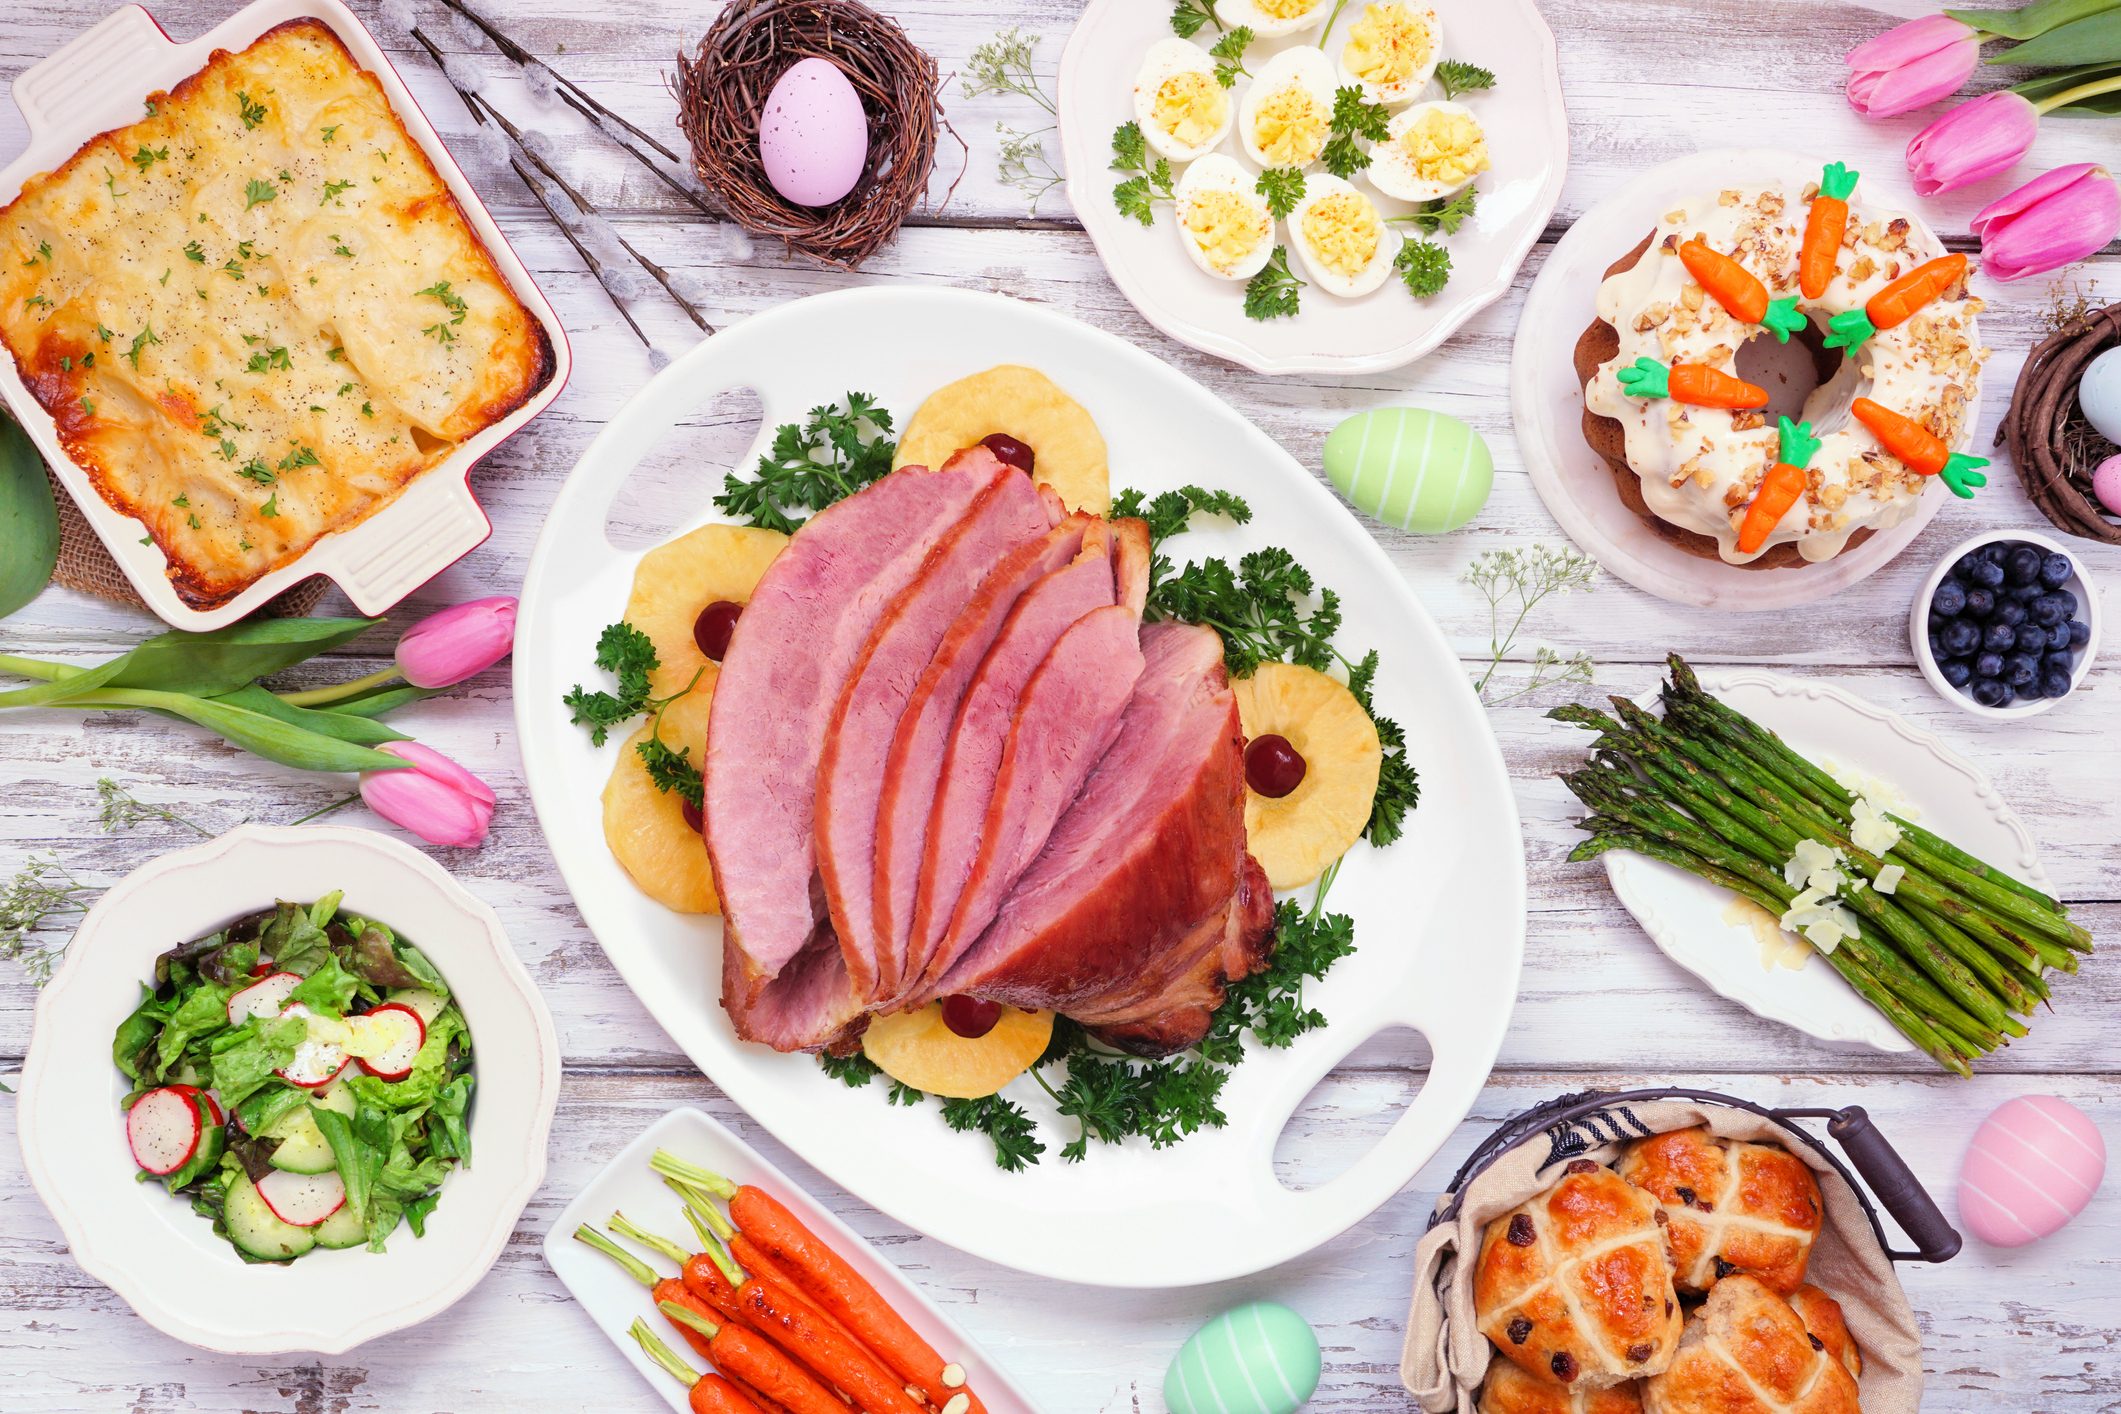 TraditionaTraditional Easter ham dinner. Top view table scene on a white wood background. Ham, scalloped potatoes, eggs, hot cross buns, carrot cake and vegetables.l Easter ham dinner. Top view table scene on a white wood background.